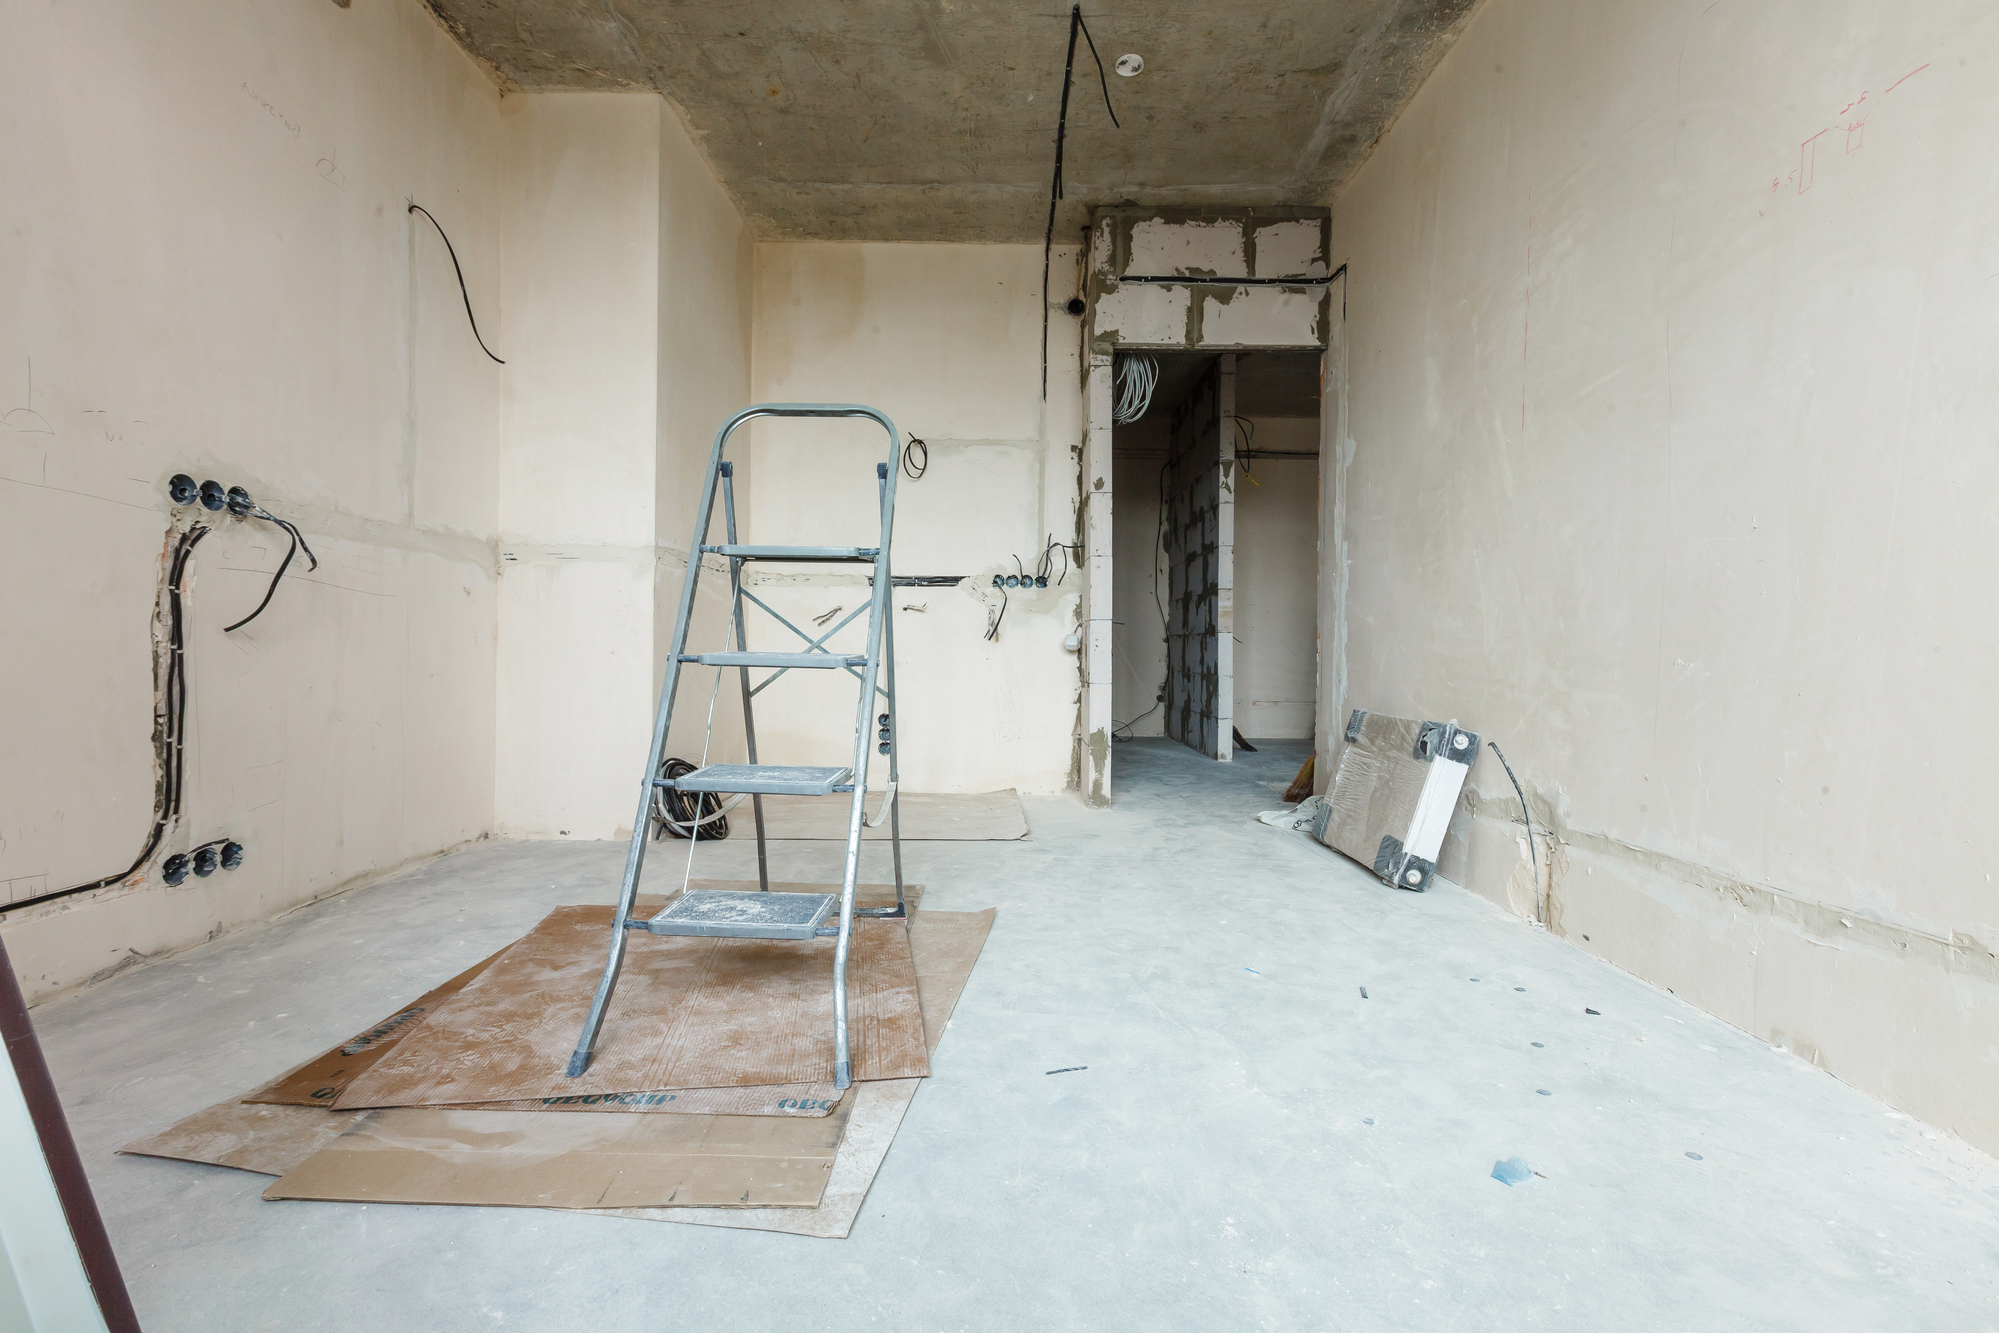 A room that is being remodeled with a ladder and scaffolding.